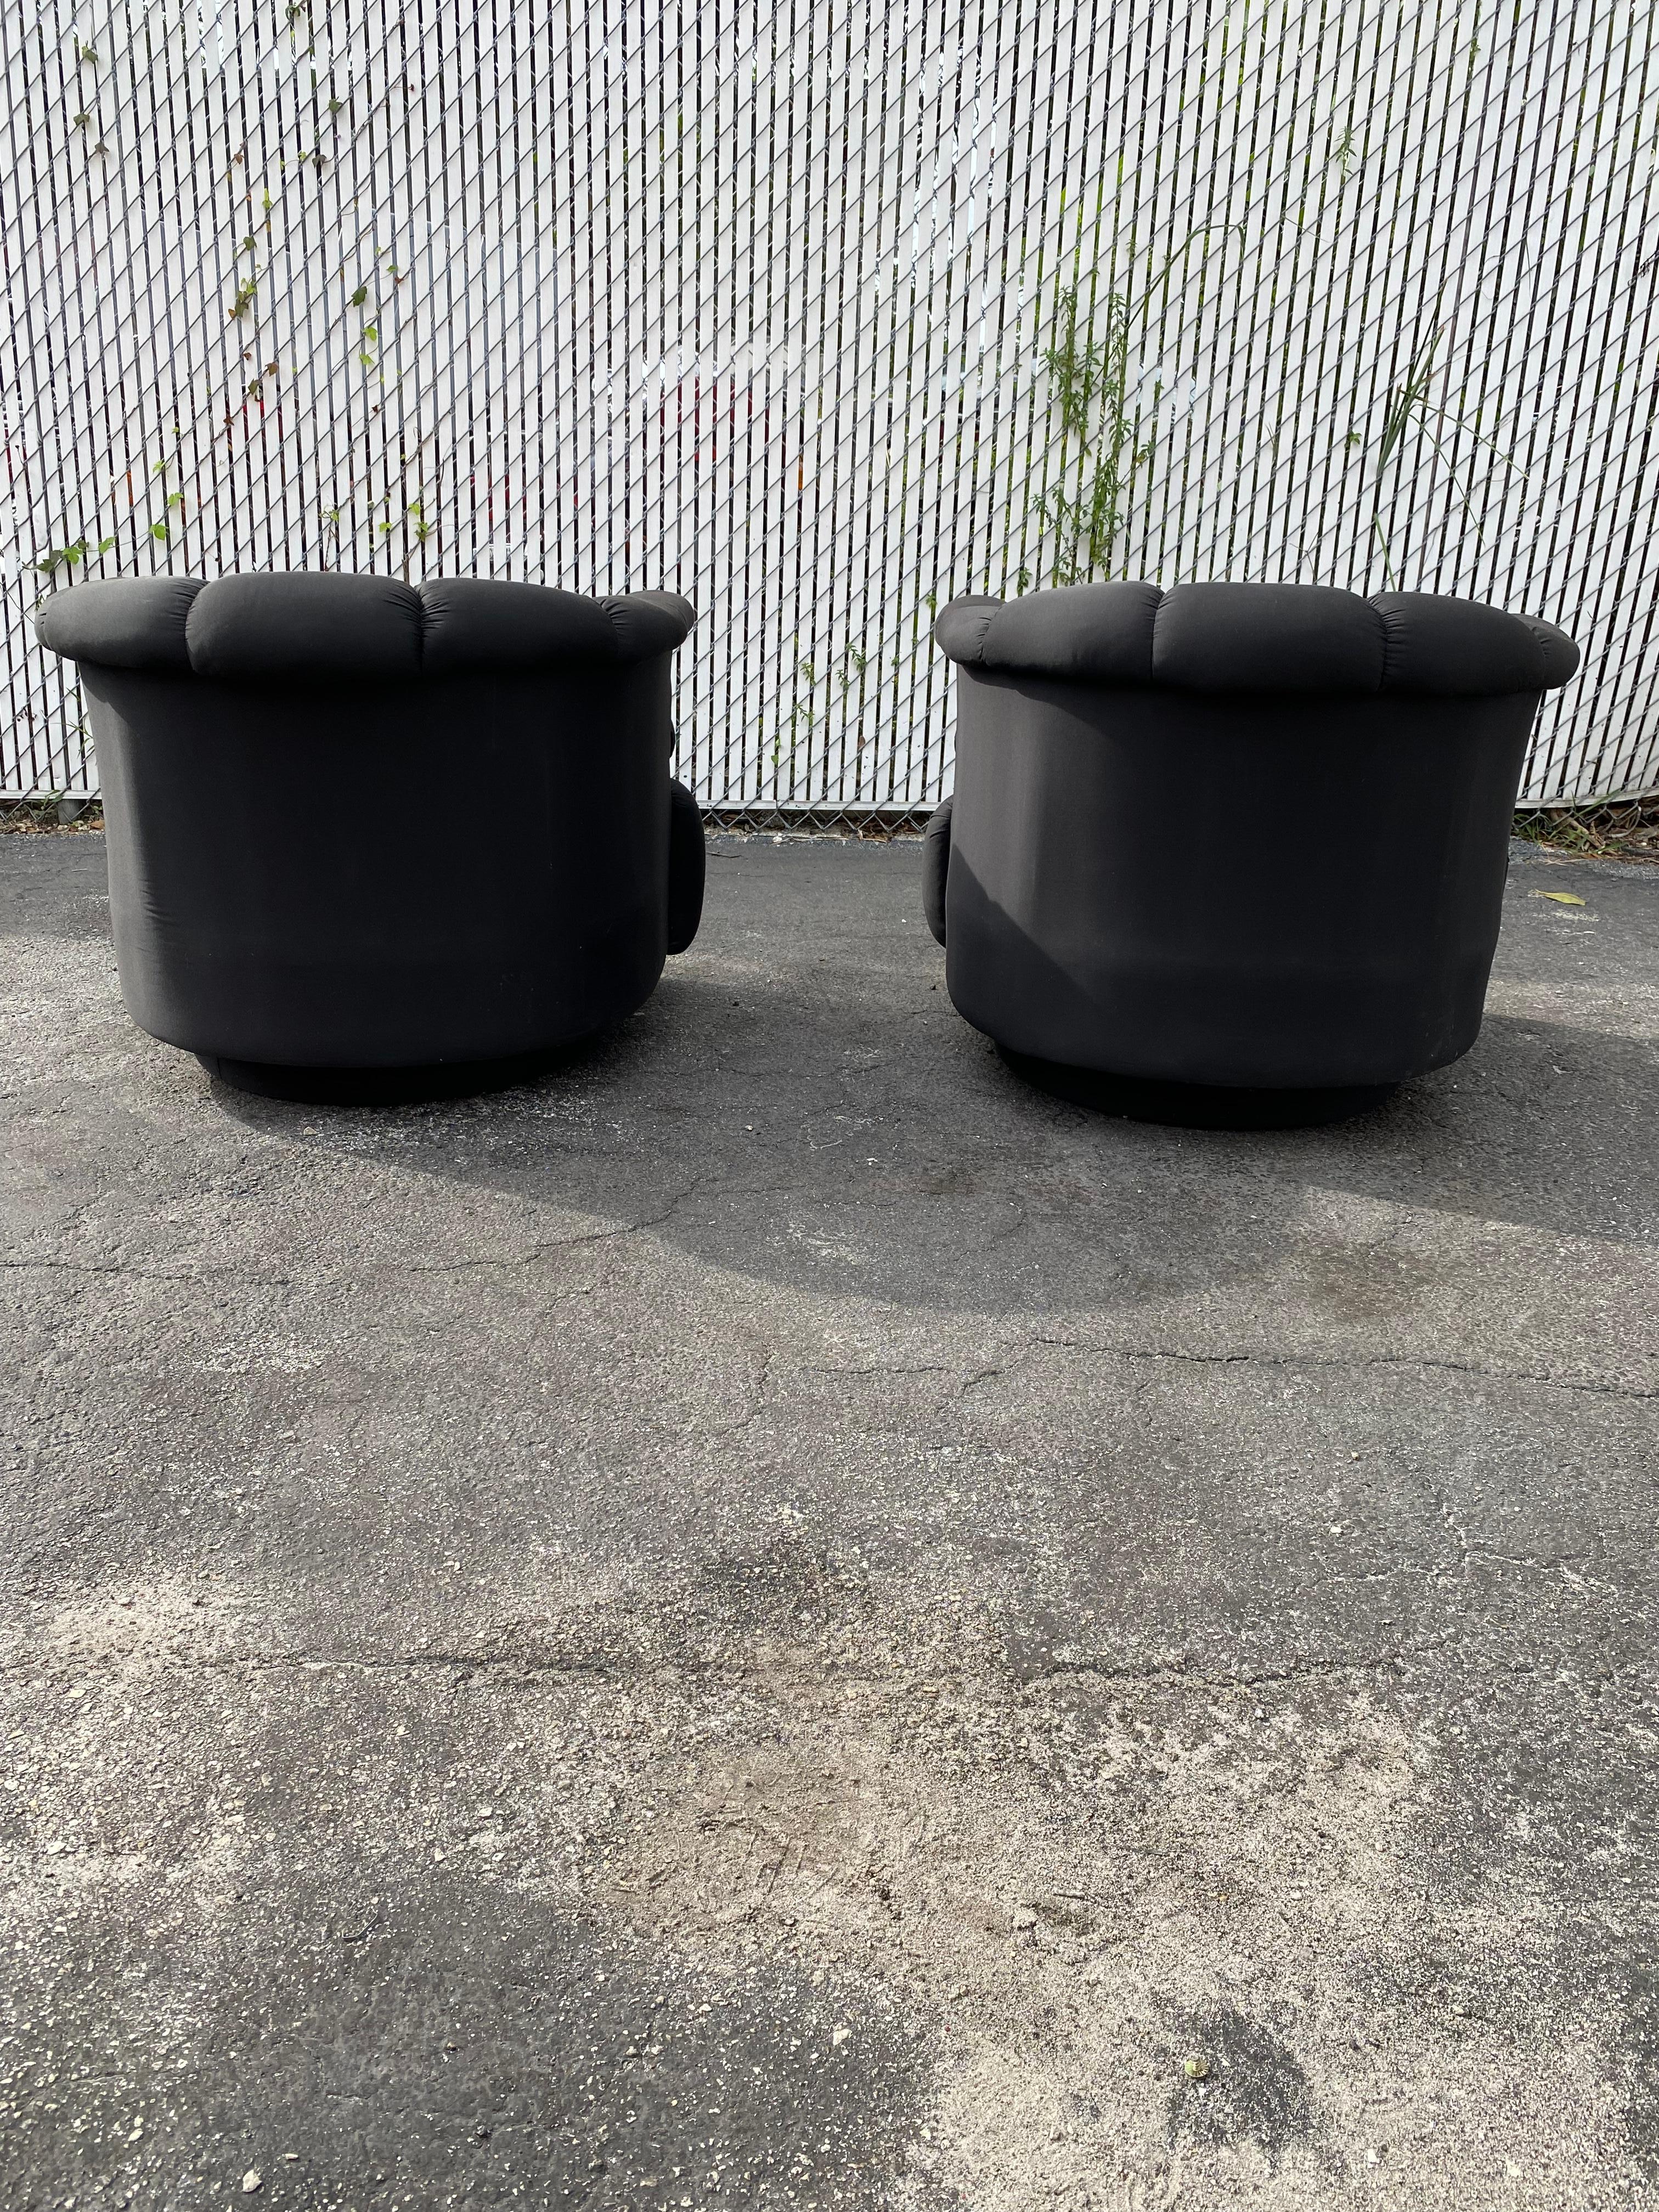 Postmoderne 1980 Croissant Tufted Channeled Swivel Chairs, Set of 2 en vente